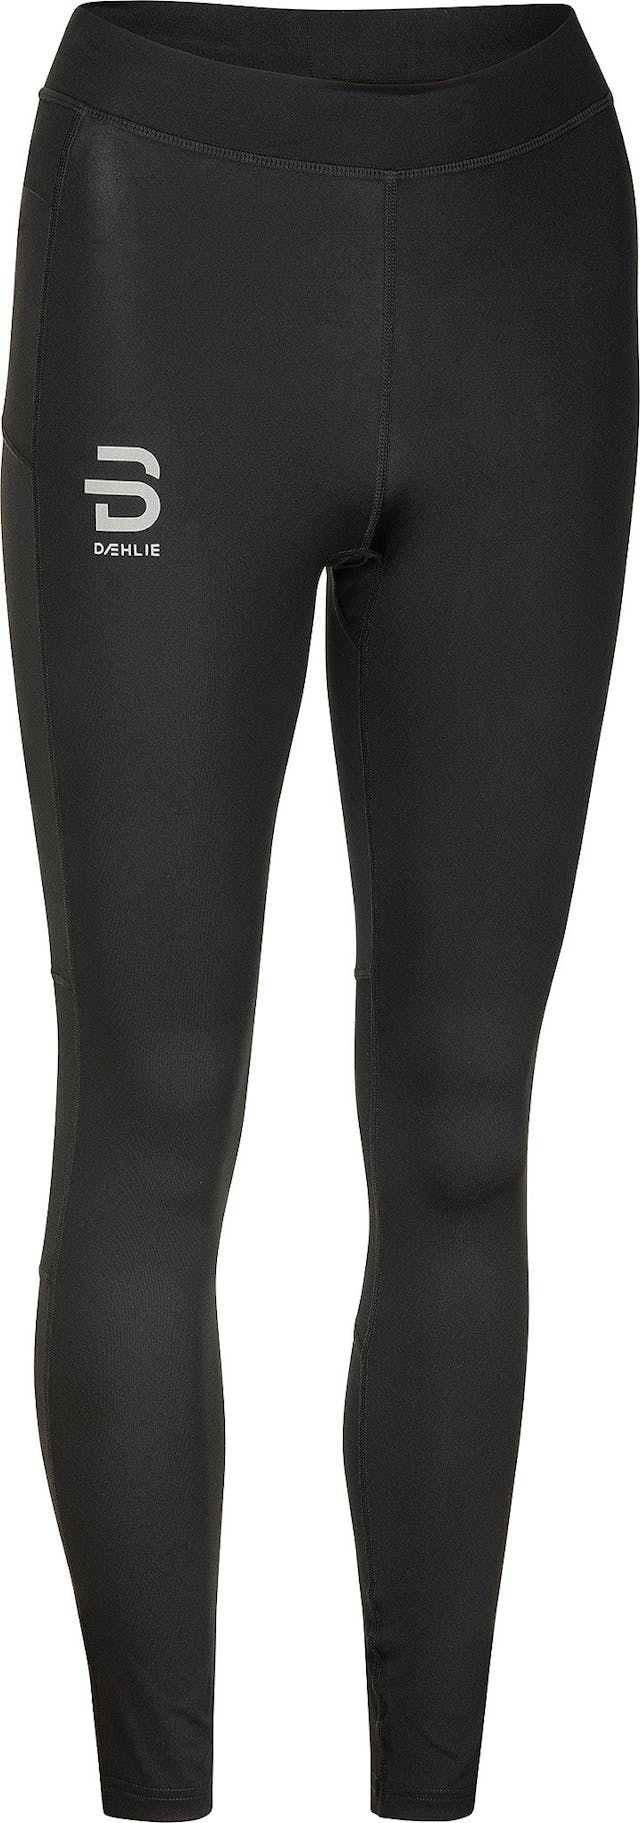 Product image for Direction Full Length Running Tights - Women's